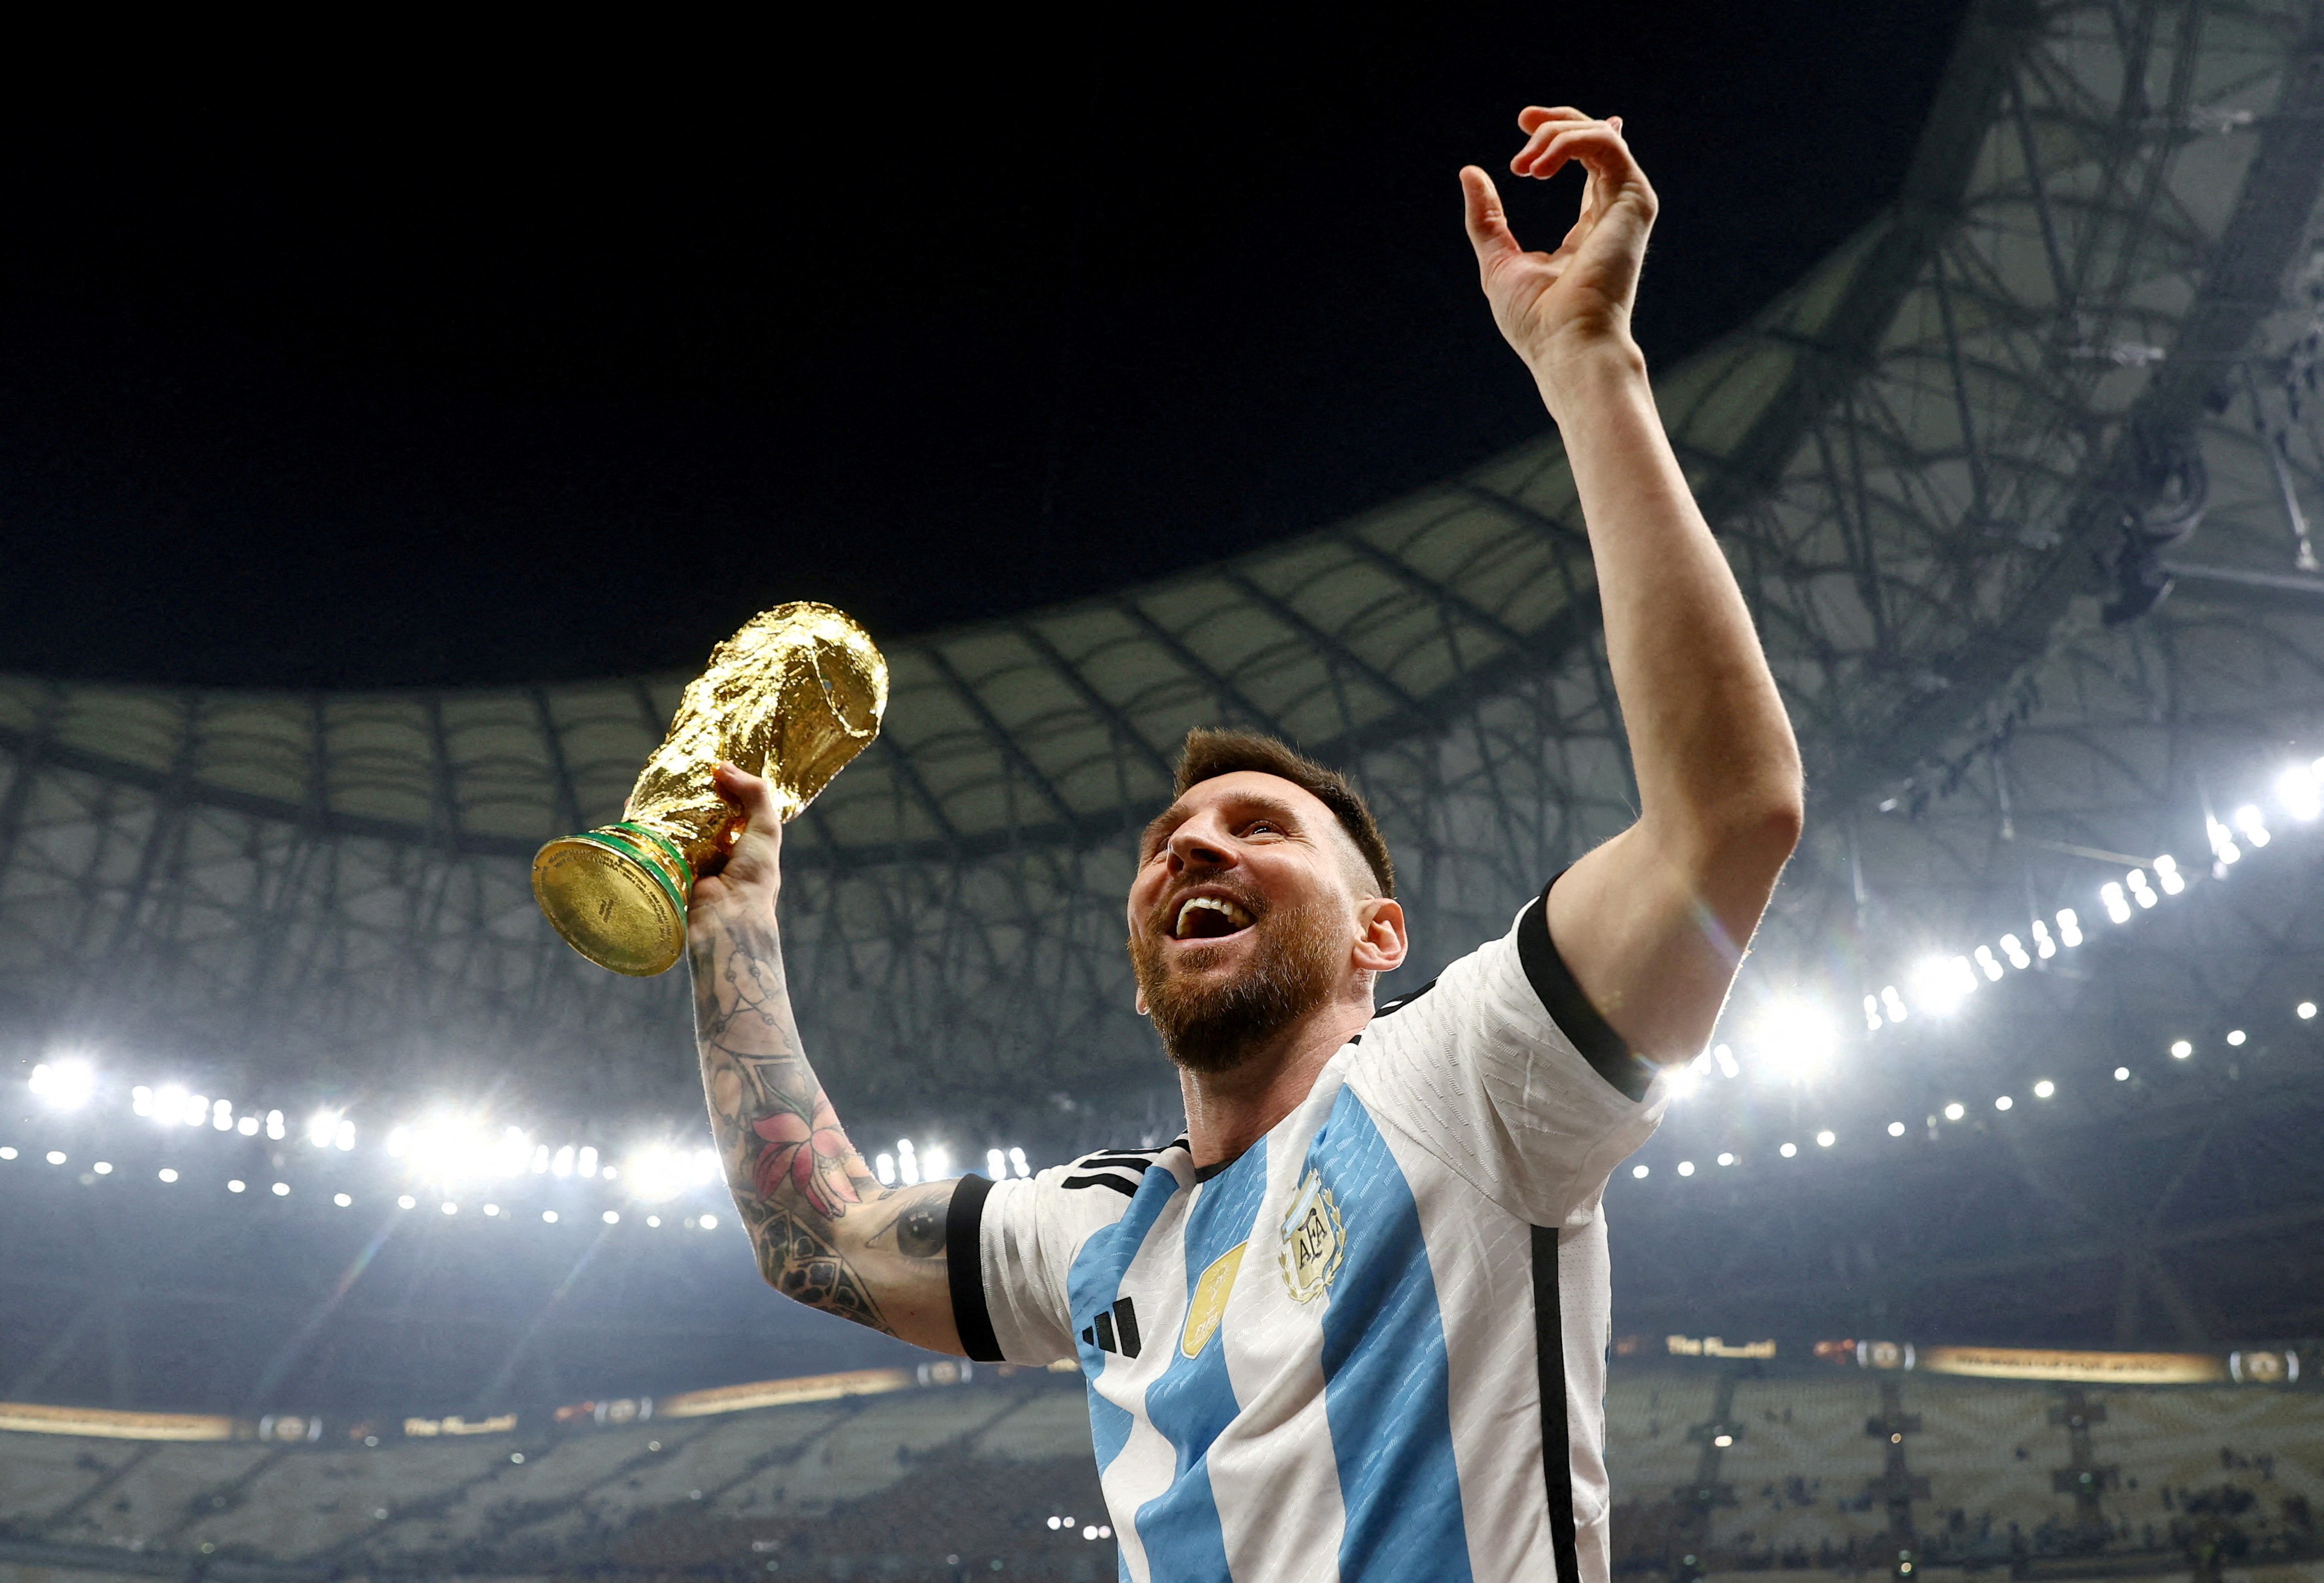 Argentina's Lionel Messi celebrates winning the World Cup with the trophy, Lusail, Qatar - December 18, 2022